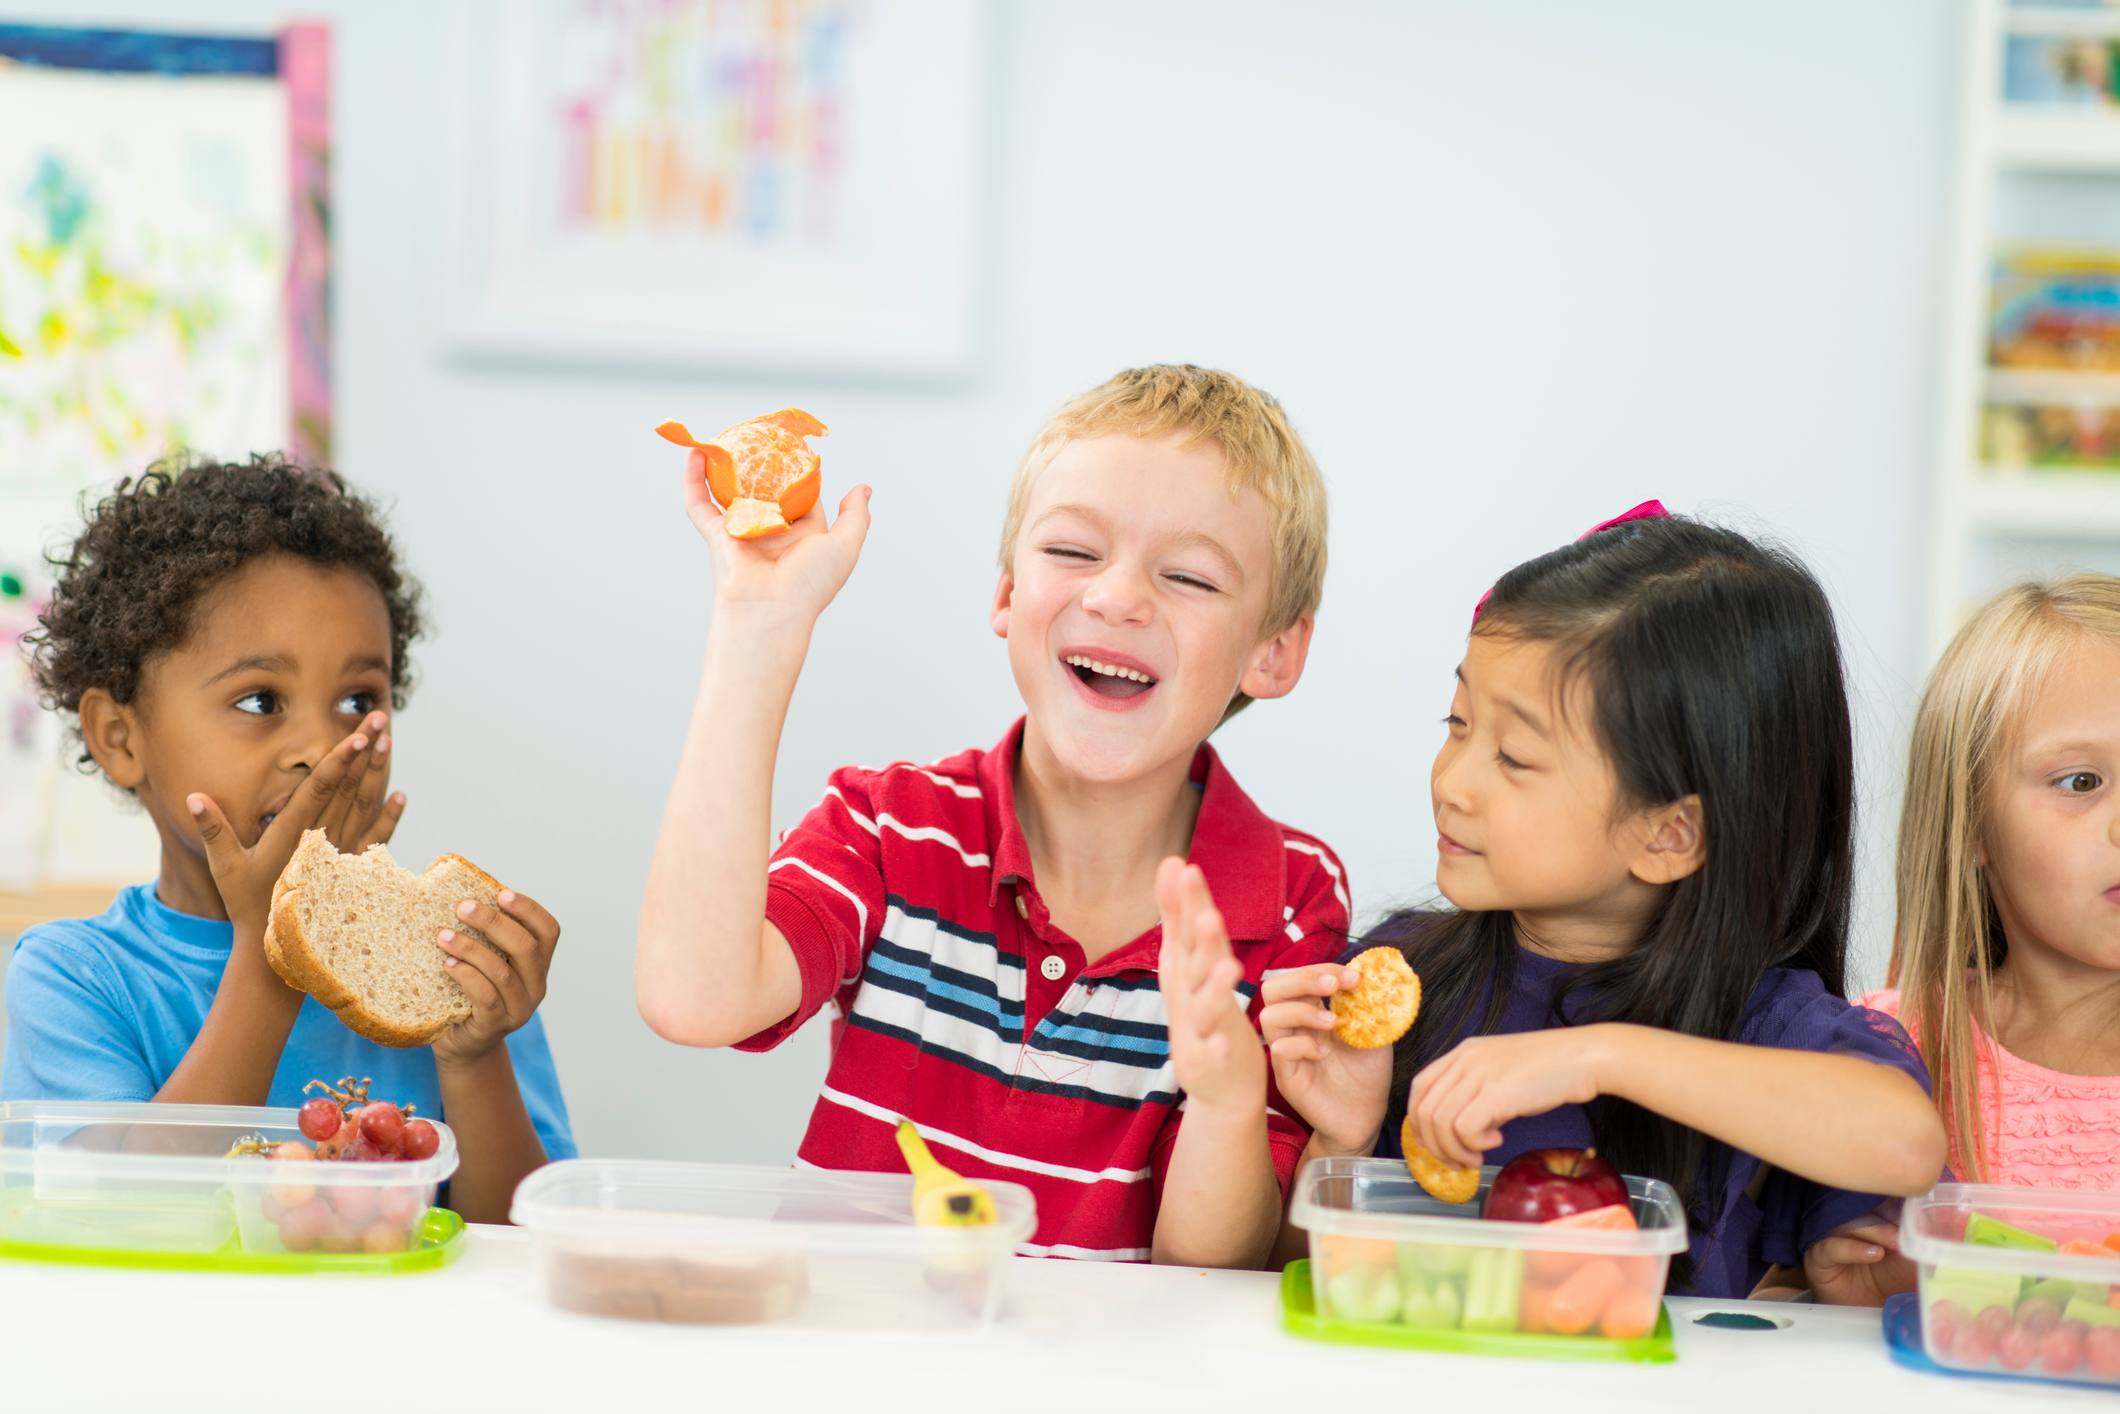 Find out what will the children's food be like? Learn more about what not to eat after the age of 30.